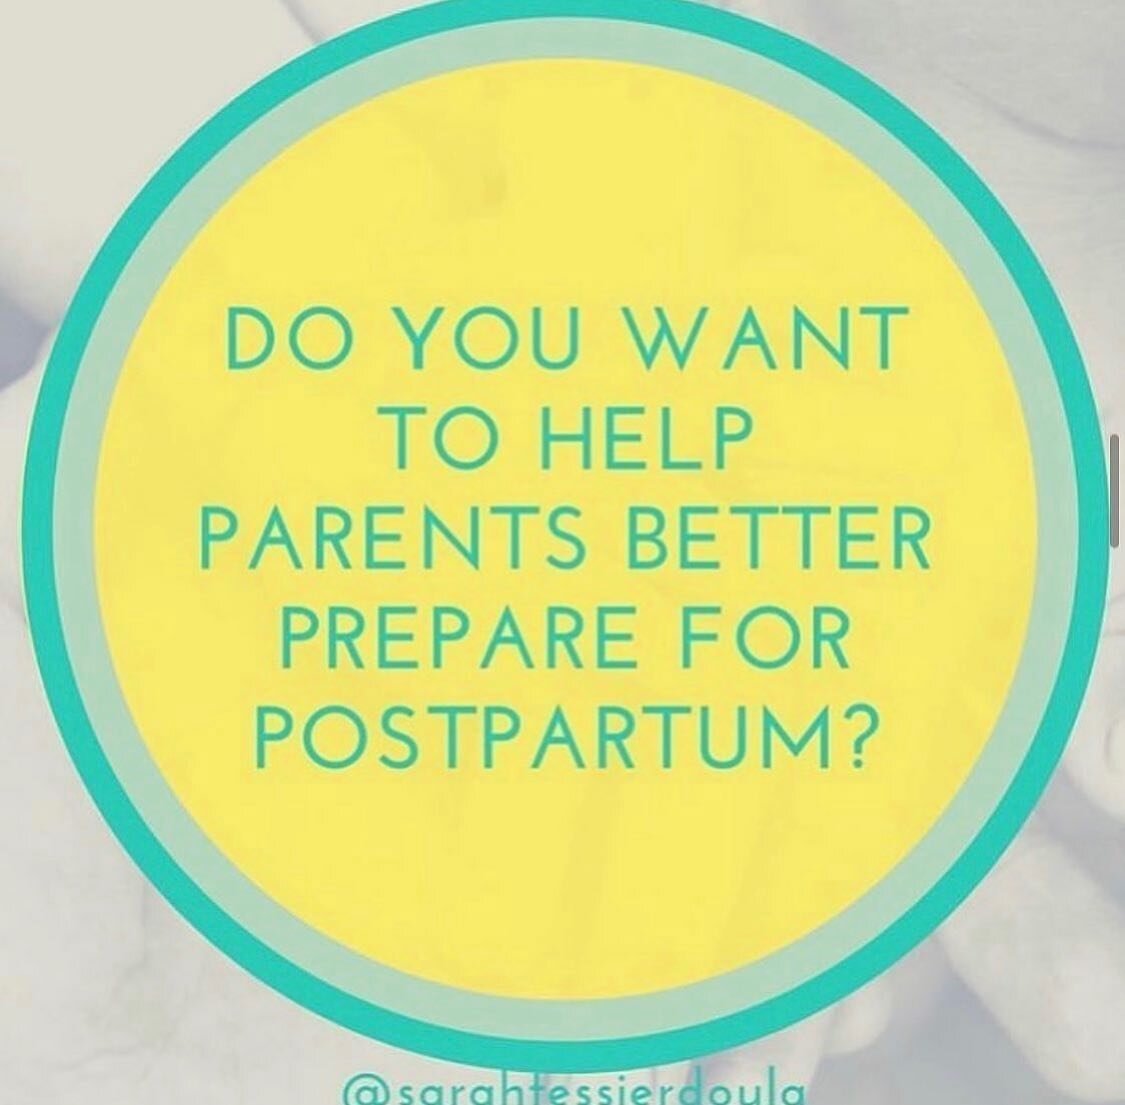 📢 Calling all birth and postnatal professional - do you want to help parents better prepare for postpartum?📢

Come join me on my Postnatal Planning Workshop taking place on Zoom over two evenings on February 26th &amp; March 4th from 7:30pm-9:30pm.